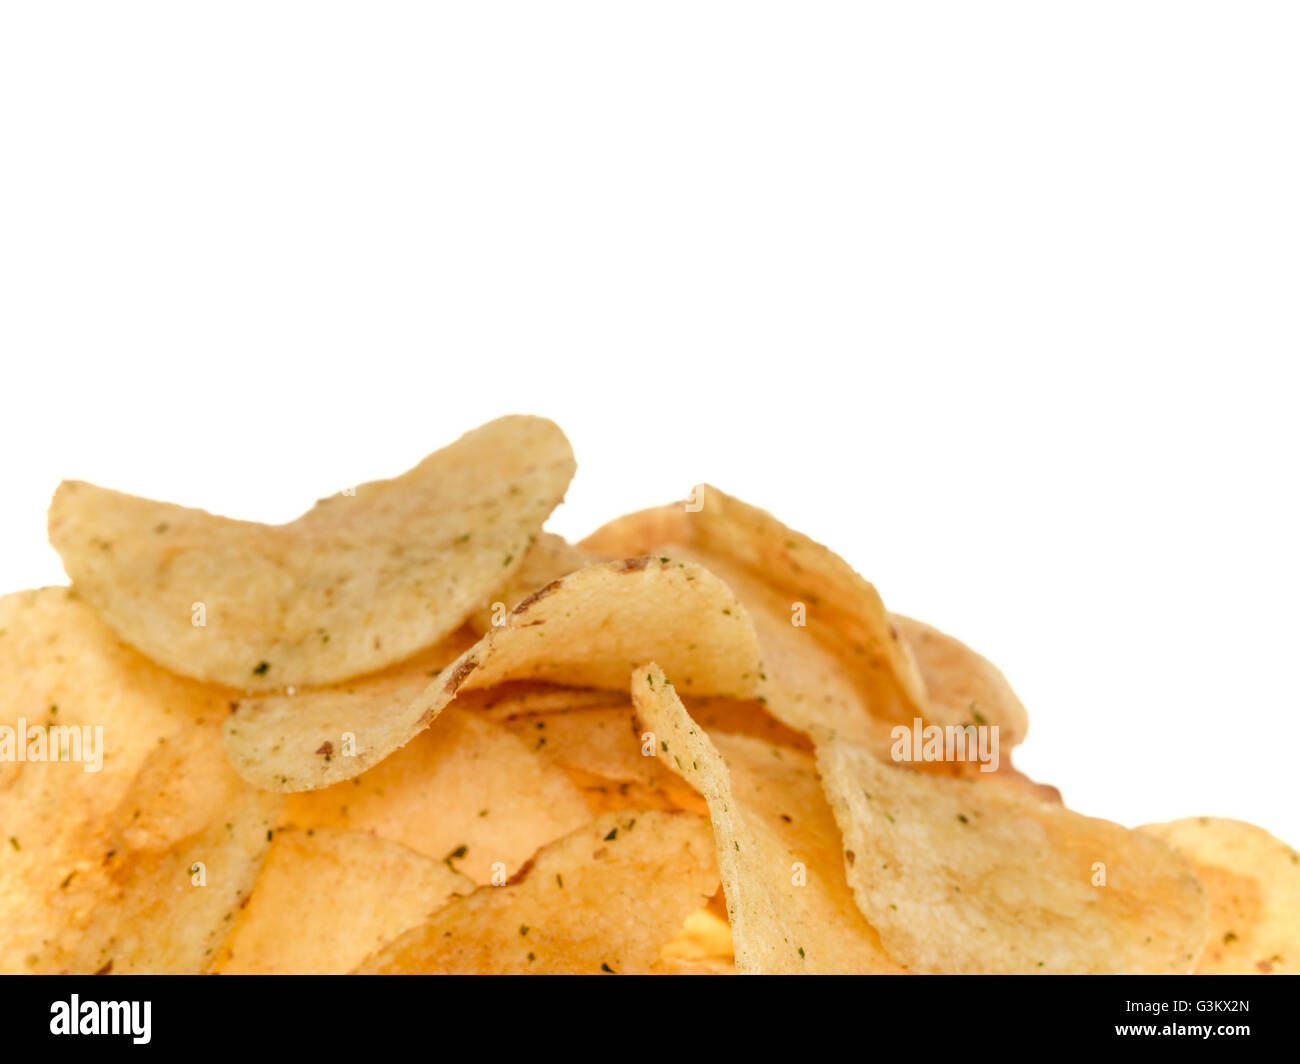 Handful of Flavored Potato Crisps Against a Plain White Background With Copy Space Stock Photo